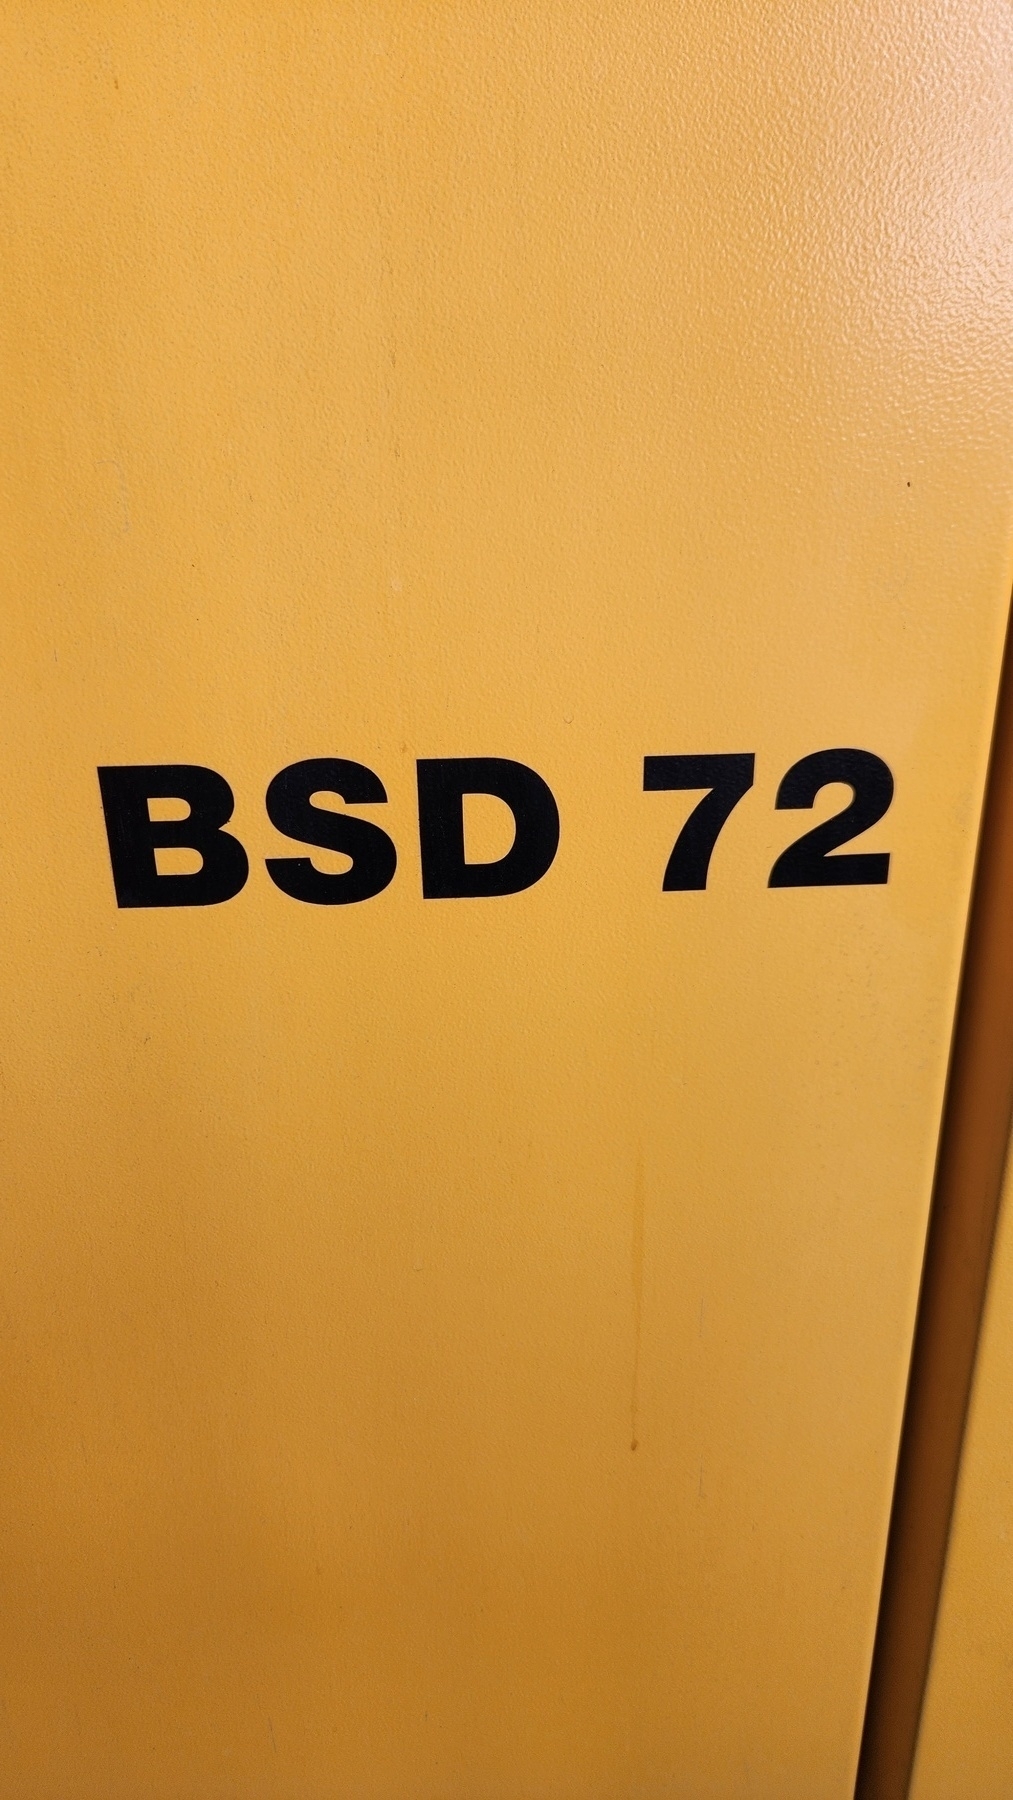 An object that says Bsd 72 on it